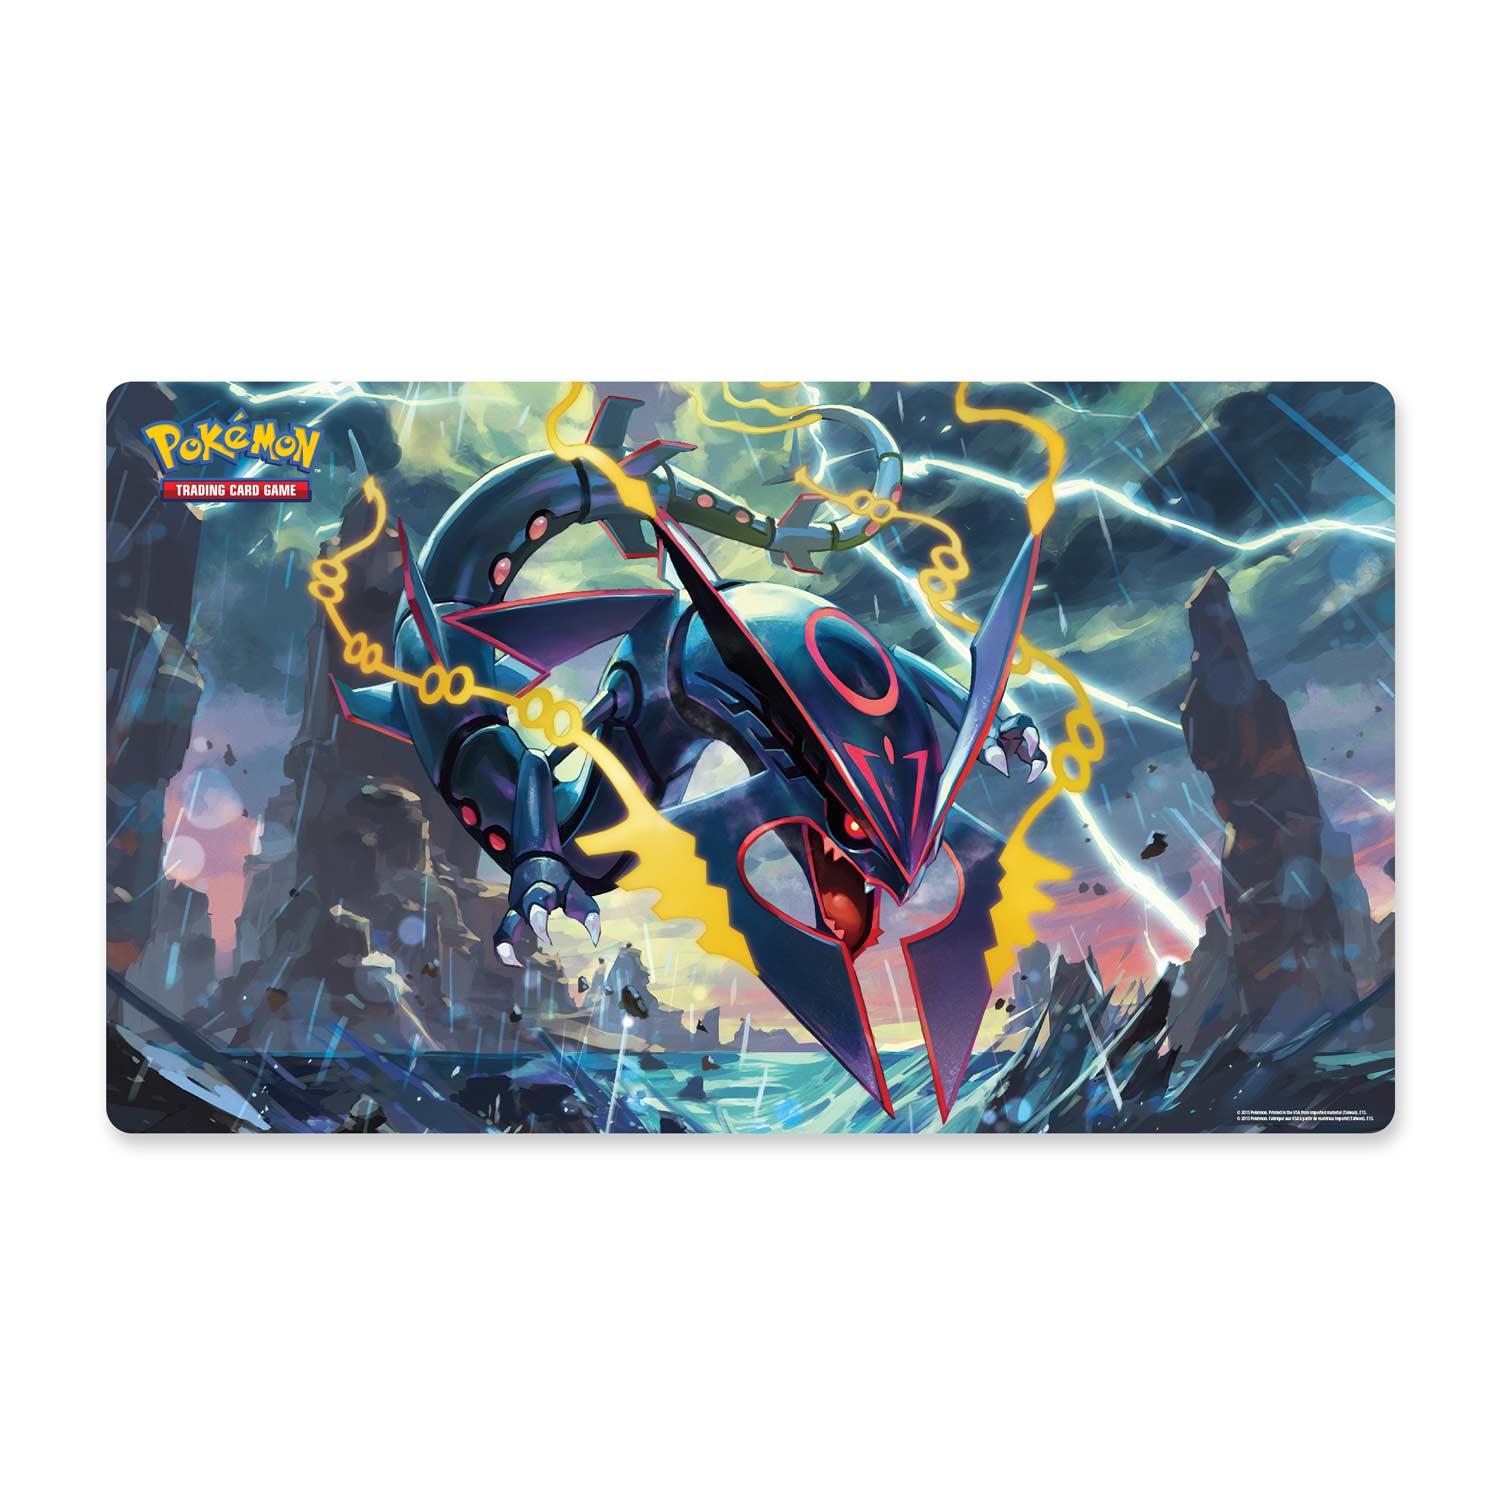 Official Shiny Mega Rayquaza Playmat for the Pokémon Trading Card Game. 